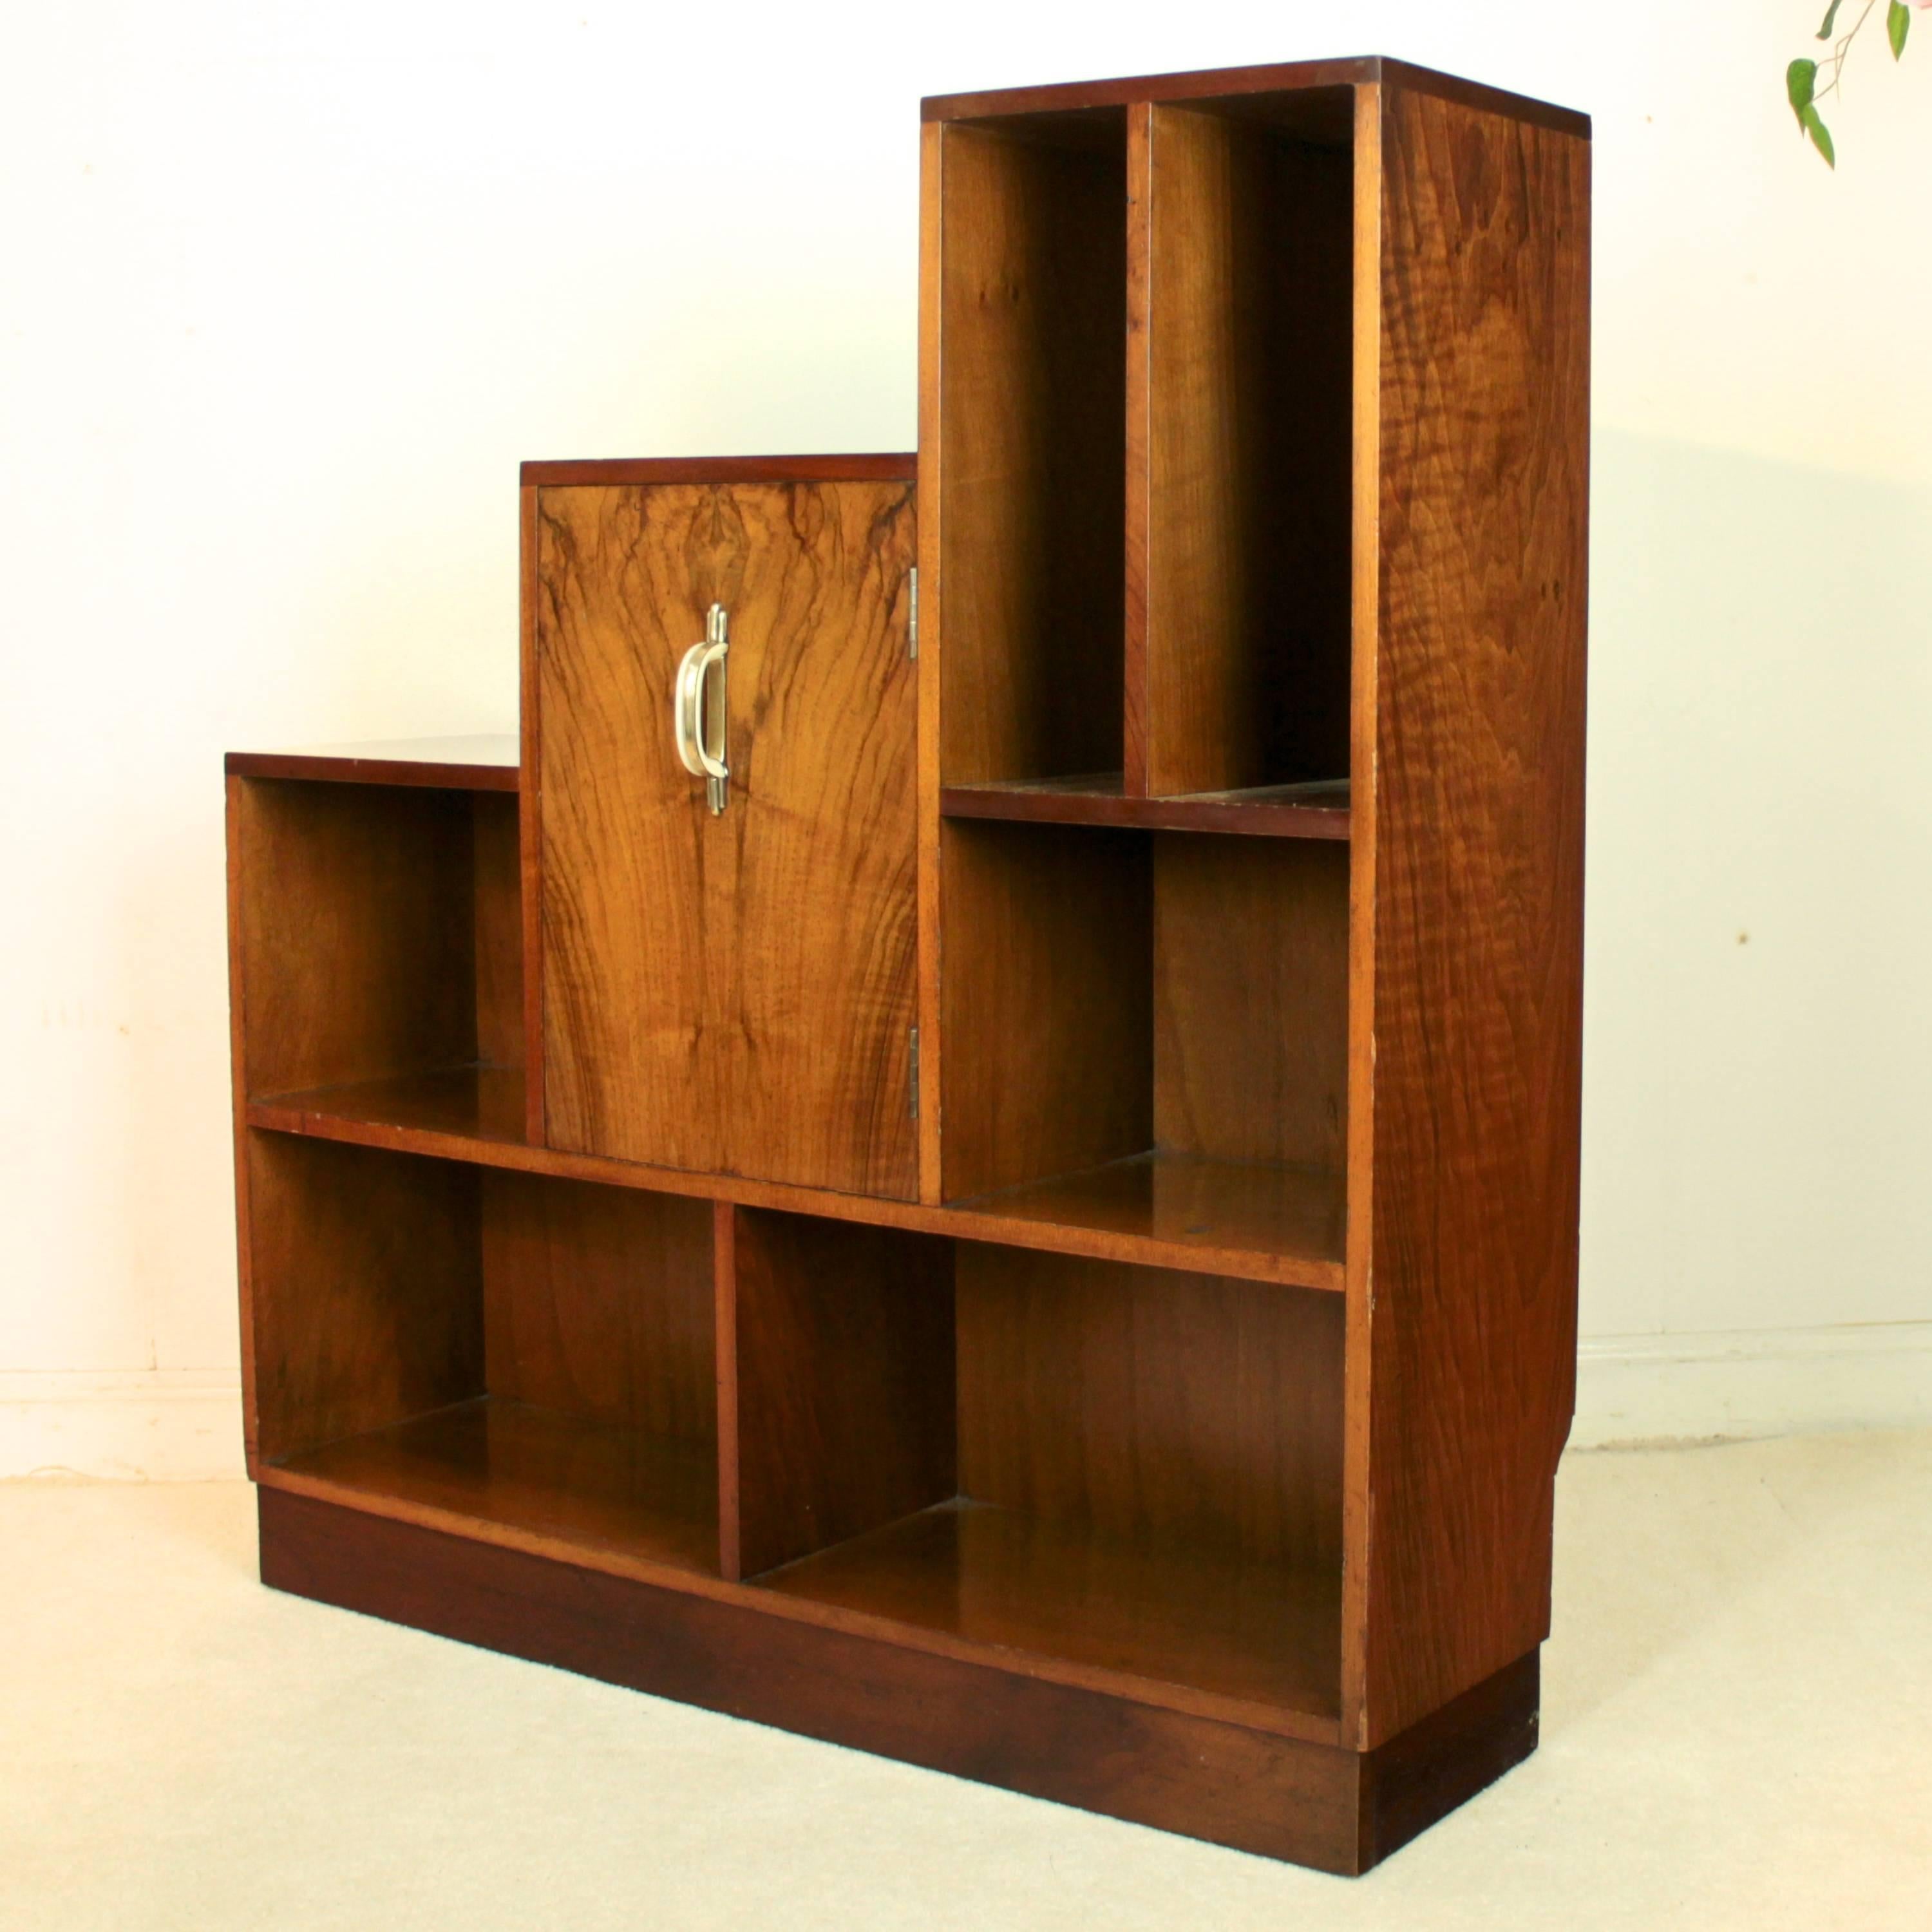 A stylish Art Deco walnut open bookcase made in 1936 by the famous British furniture makers E Gomme. Measuring just over 36in wide it has a stepped top with various open shelves and a central cupboard door with original cream bakelite and brass